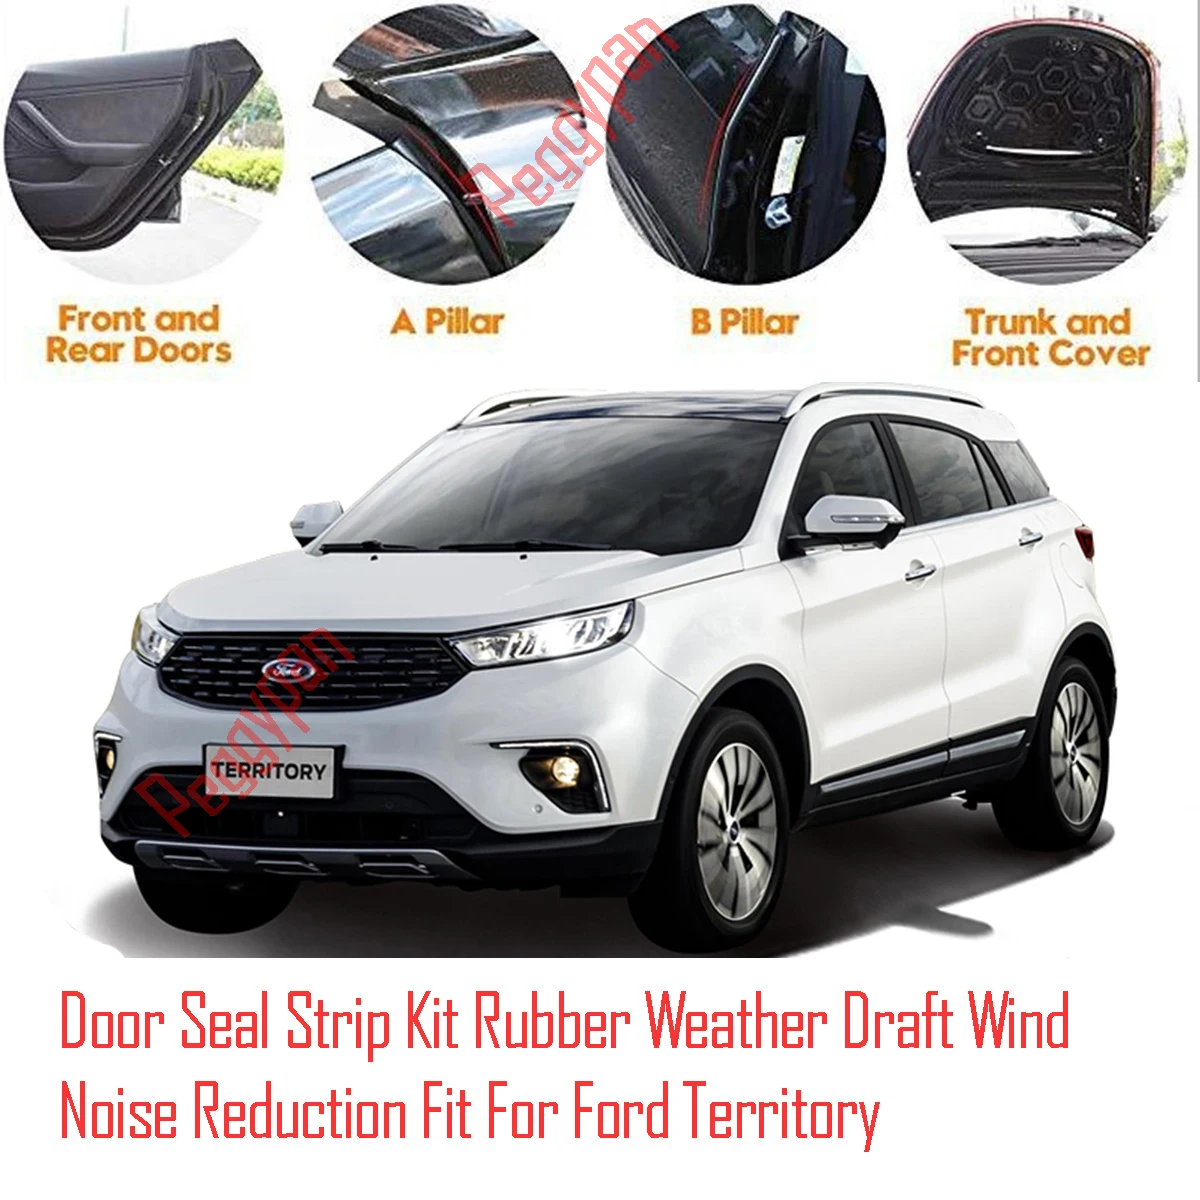 Door Seal Strip Kit Self Adhesive Window Engine Cover Soundproof Rubber Weather Draft Wind Noise Reduction For Ford Territory